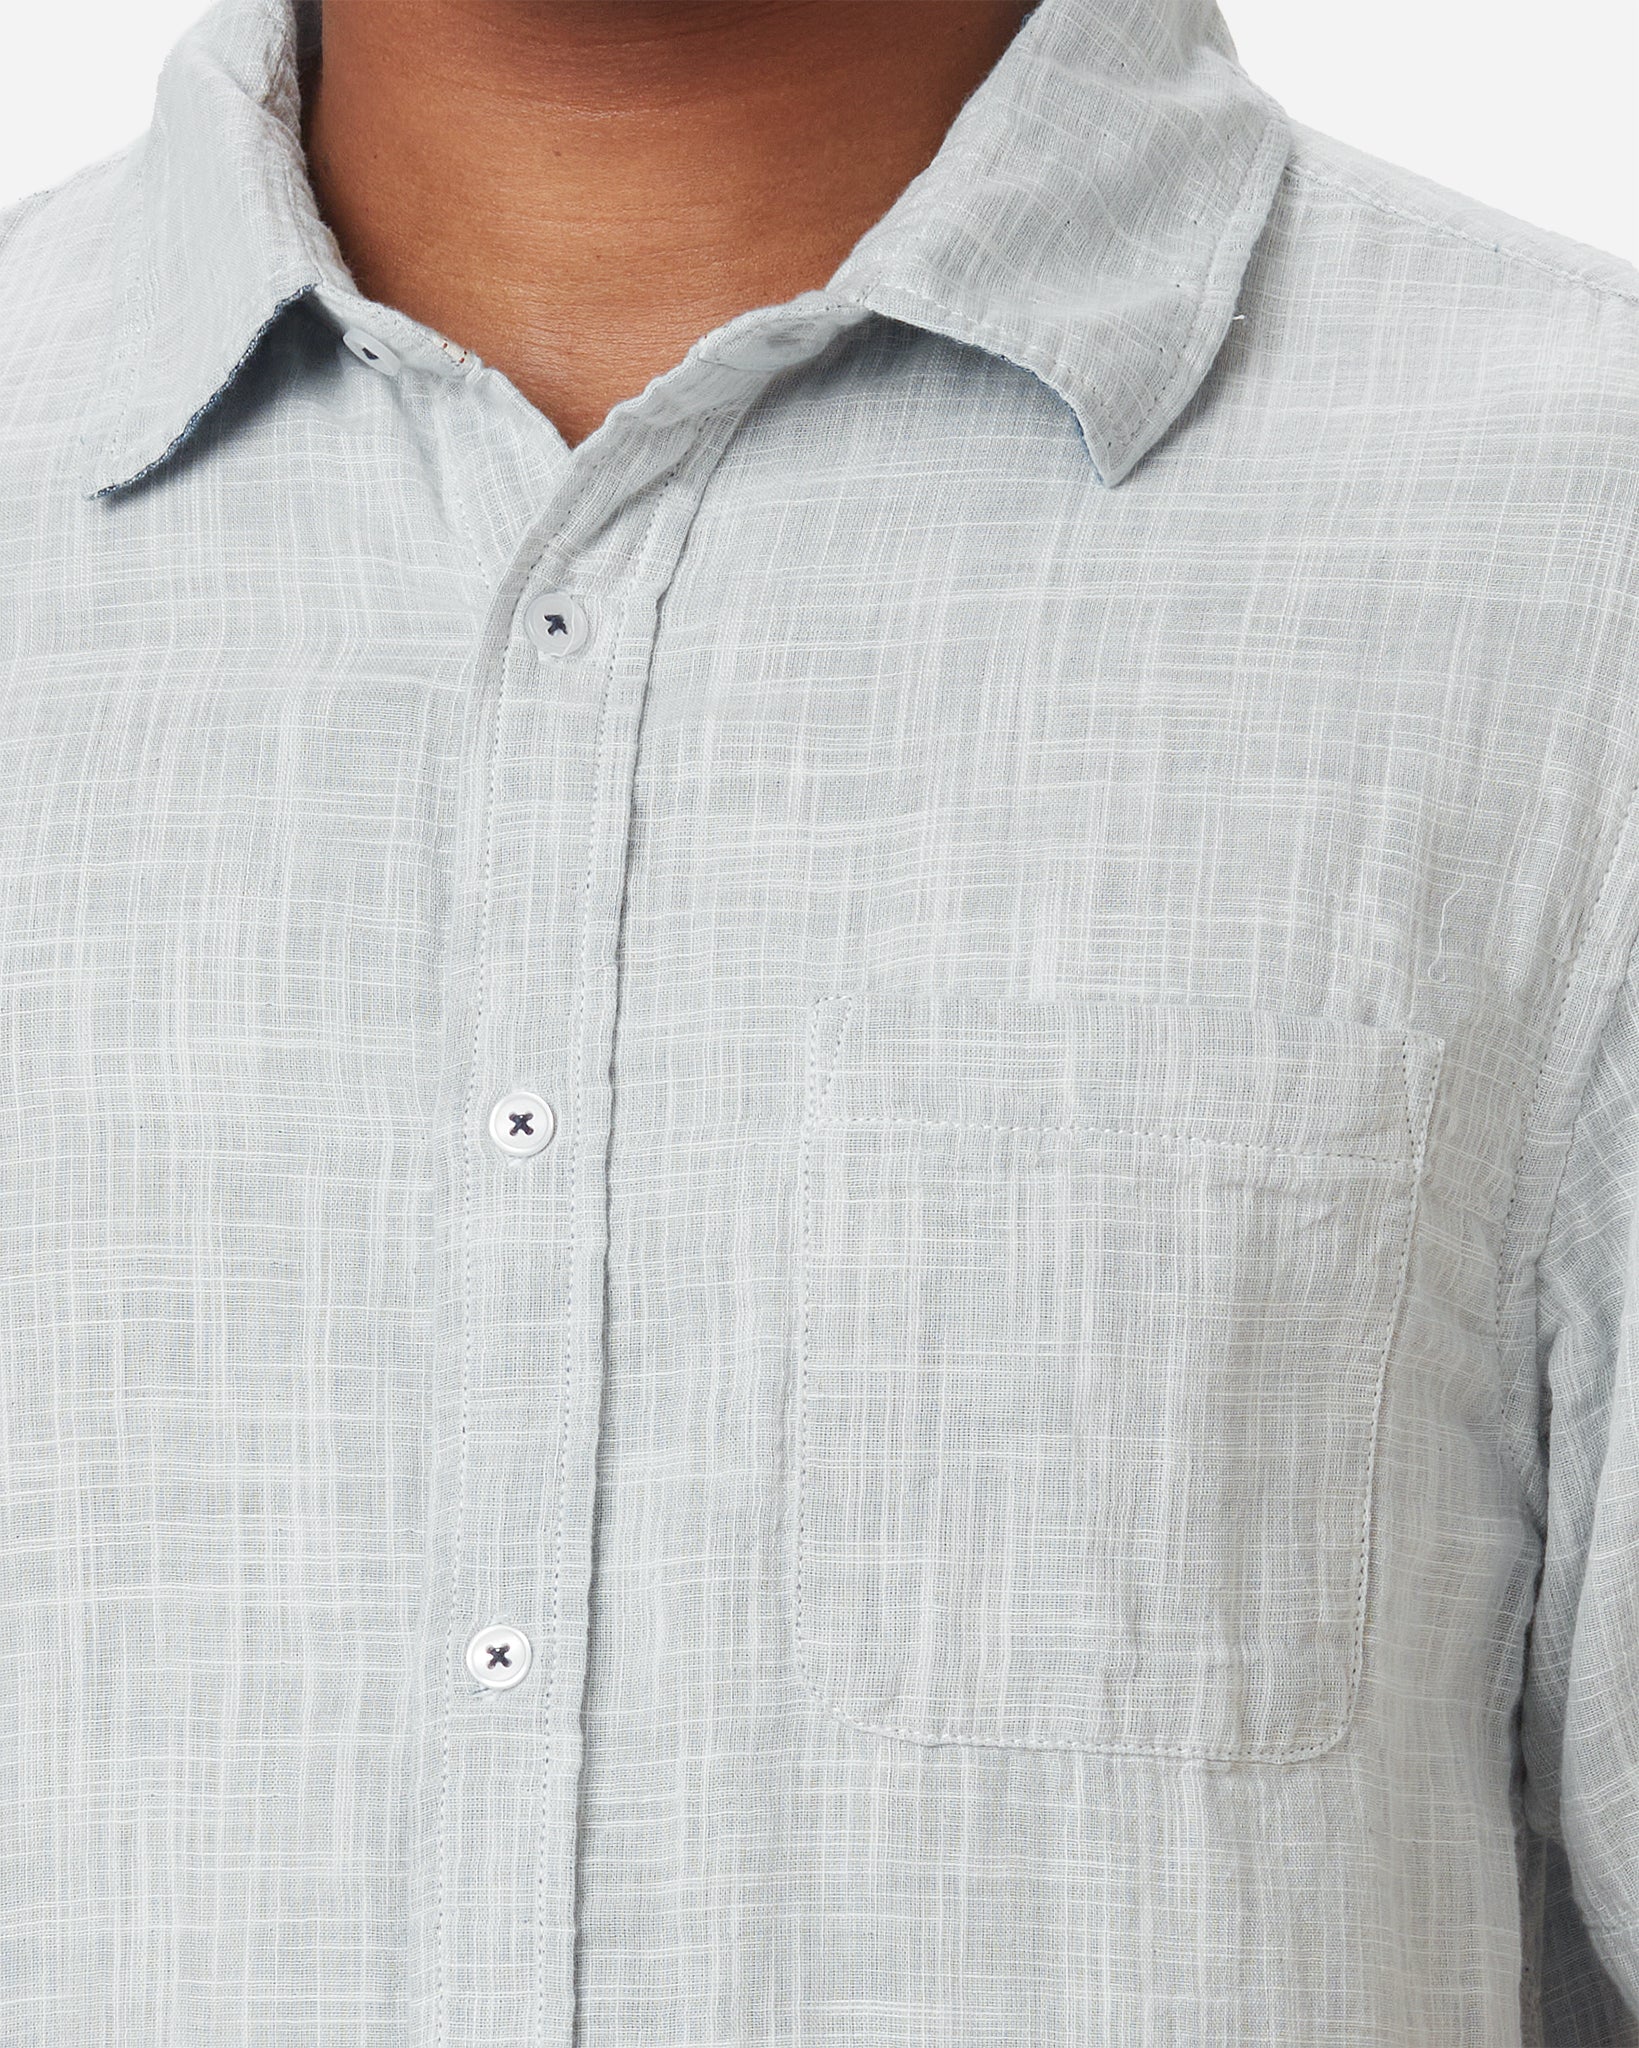 Zoom in of neck, collar, breast pocket, and buttons on model wearing Ace Rivington collared grey short-sleeved double gauze soft-textured cotton shirt with indigo blue interior, pearl buttons, and left-breast pocket 